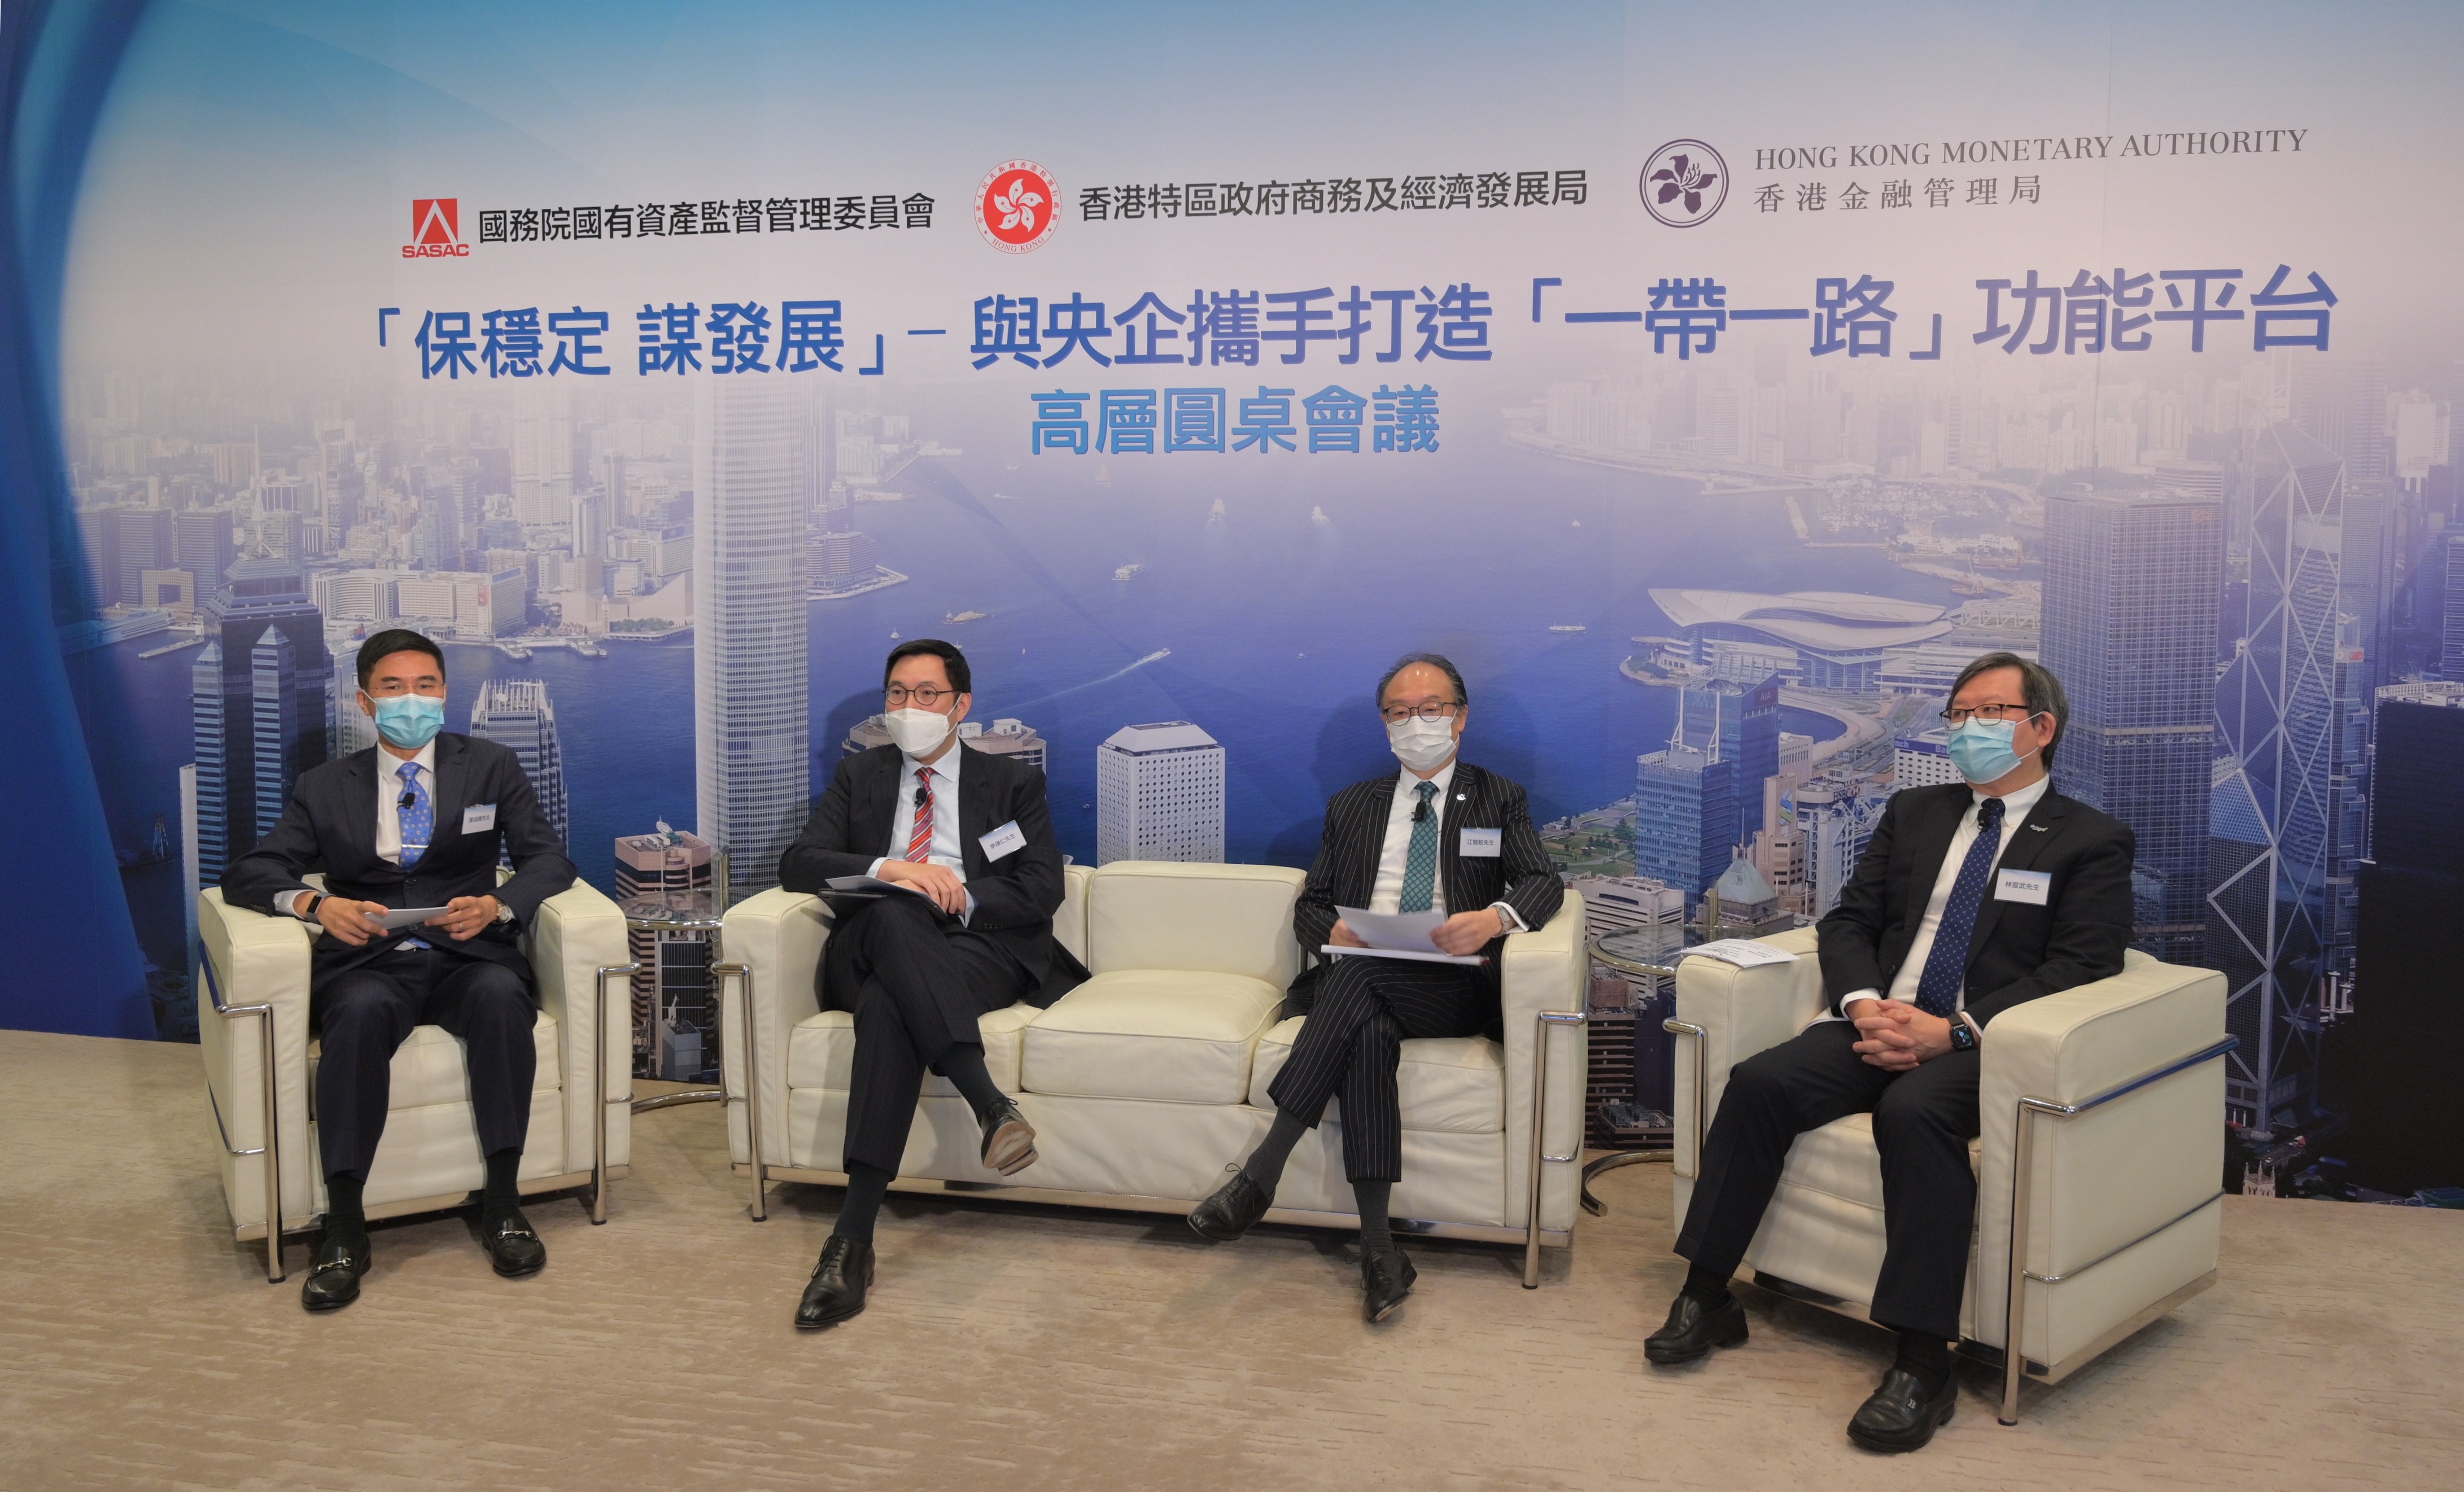 The Commissioner for Belt and Road, Mr Denis Yip (first left), moderated a discussion session at the high-level roundtable on ″Fostering Hong Kong as Belt and Road Functional Platform together with State-owned Enterprises″, joined by speakers including (from second left) the Chairman of the Financial Services Development Council, Mr Laurence Li; the Immediate Past President of the Hong Kong Institute of Certified Public Accountants, Mr Johnson Kong; and the Chairman of the Hong Kong Productivity Council, Mr Willy Lin.